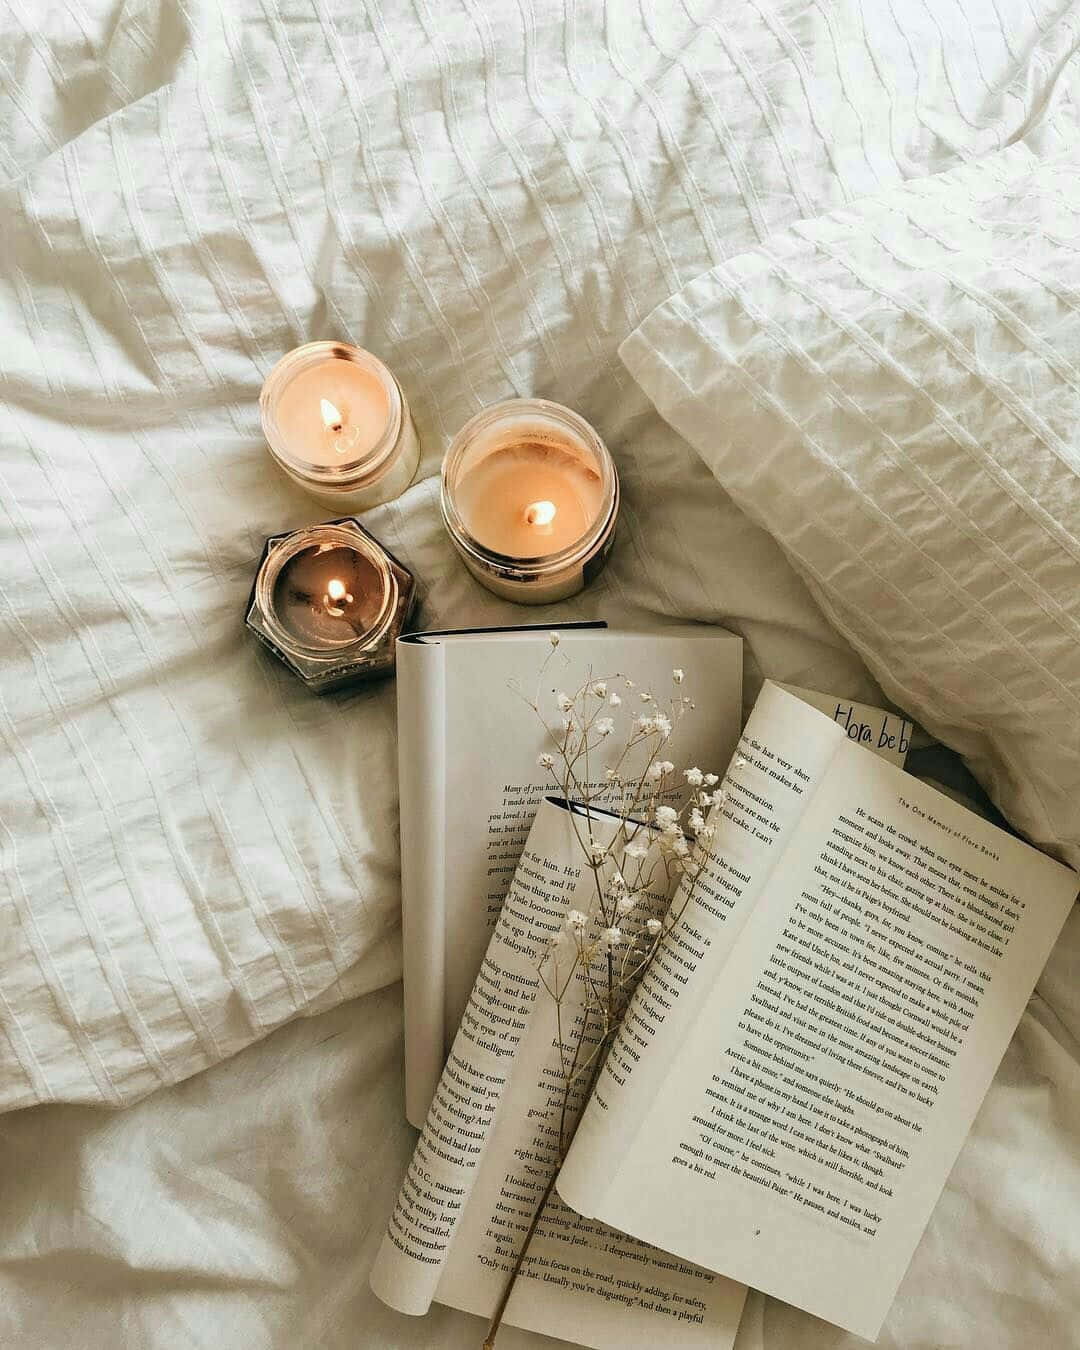 A Book, Candles, And Flowers On A Bed